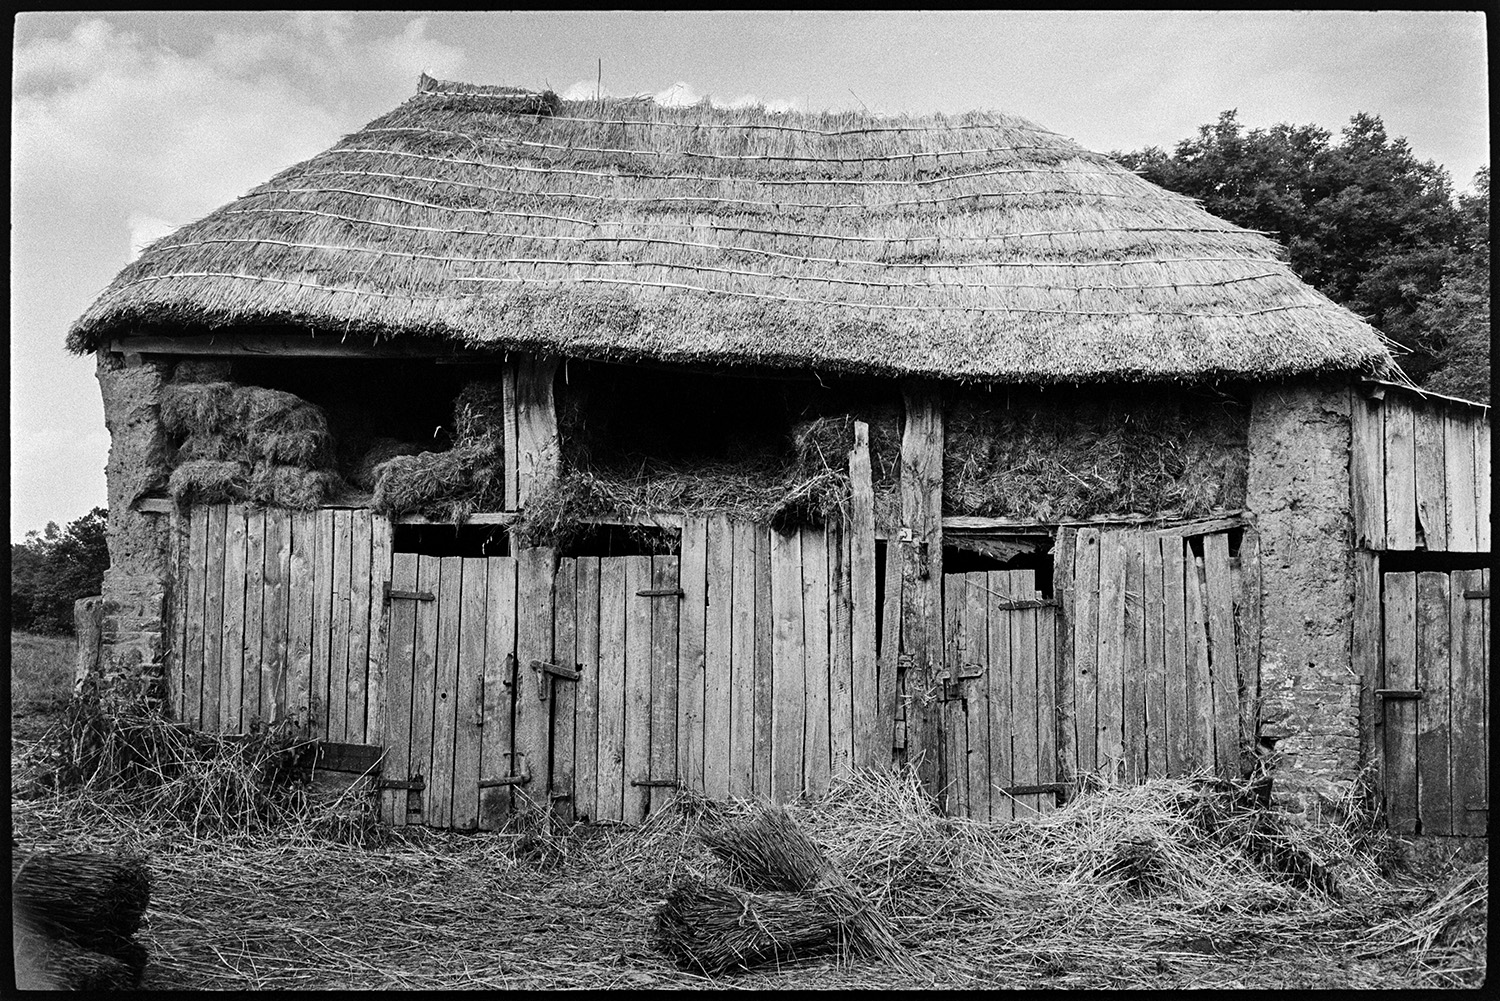 Old barn being thatched. 
[A cob barn which is bring re-thatched by Bill Hammond at Newhouse, Ashreigney. The bottom half of the barn is covered with wooden planks and doors, and hay bales can be seen in the top half. Nitches of reed are visible in the foreground.]